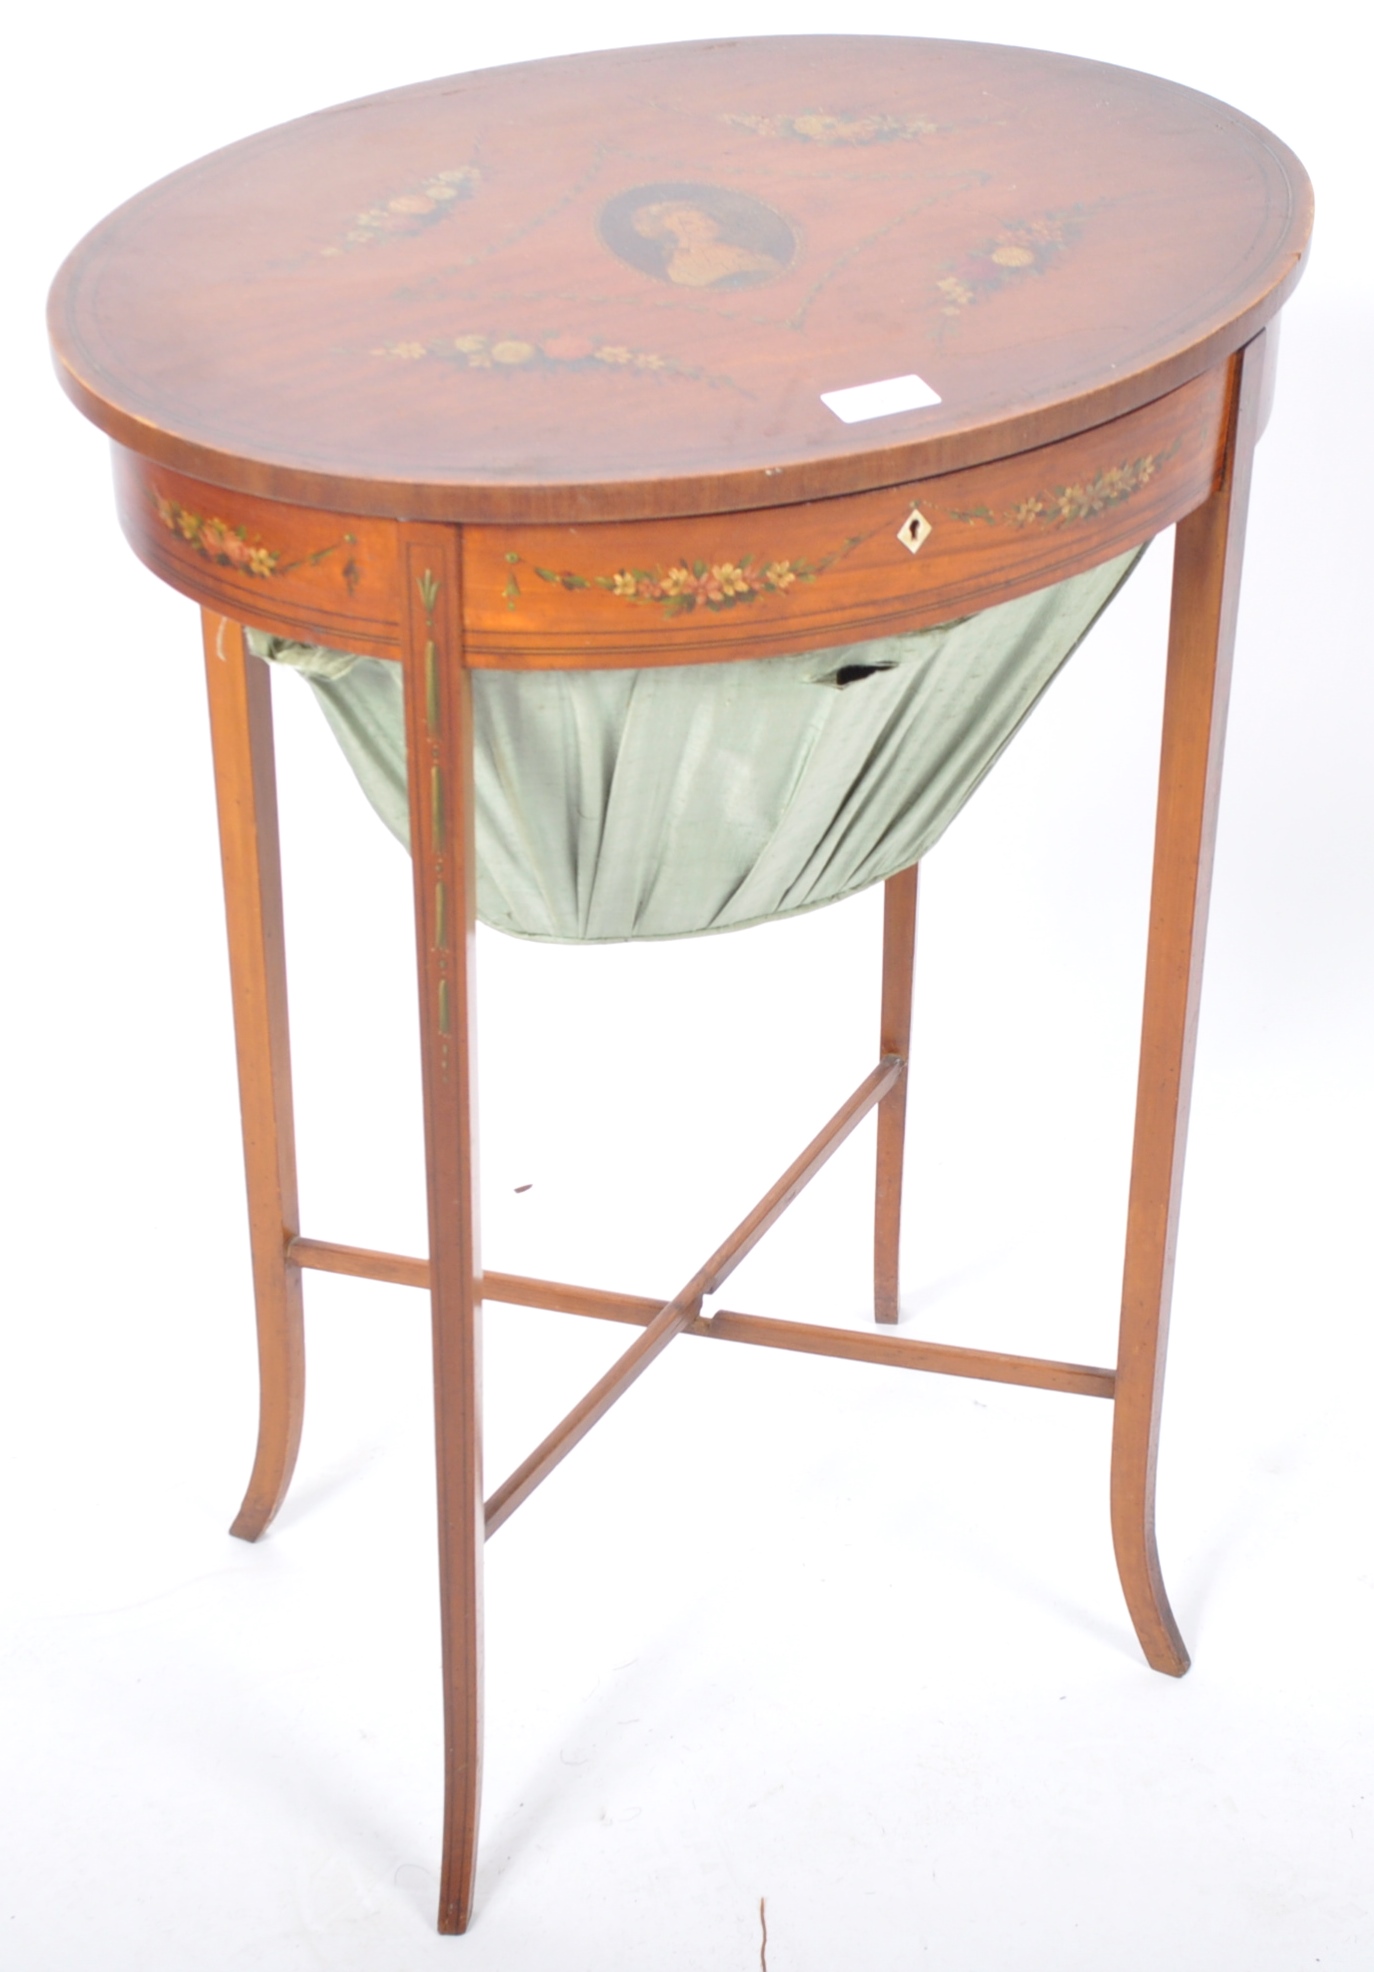 18TH CENTURY SHERATON PERIOD PAINTED MAHOGANY SEWING TABLE - Image 2 of 5